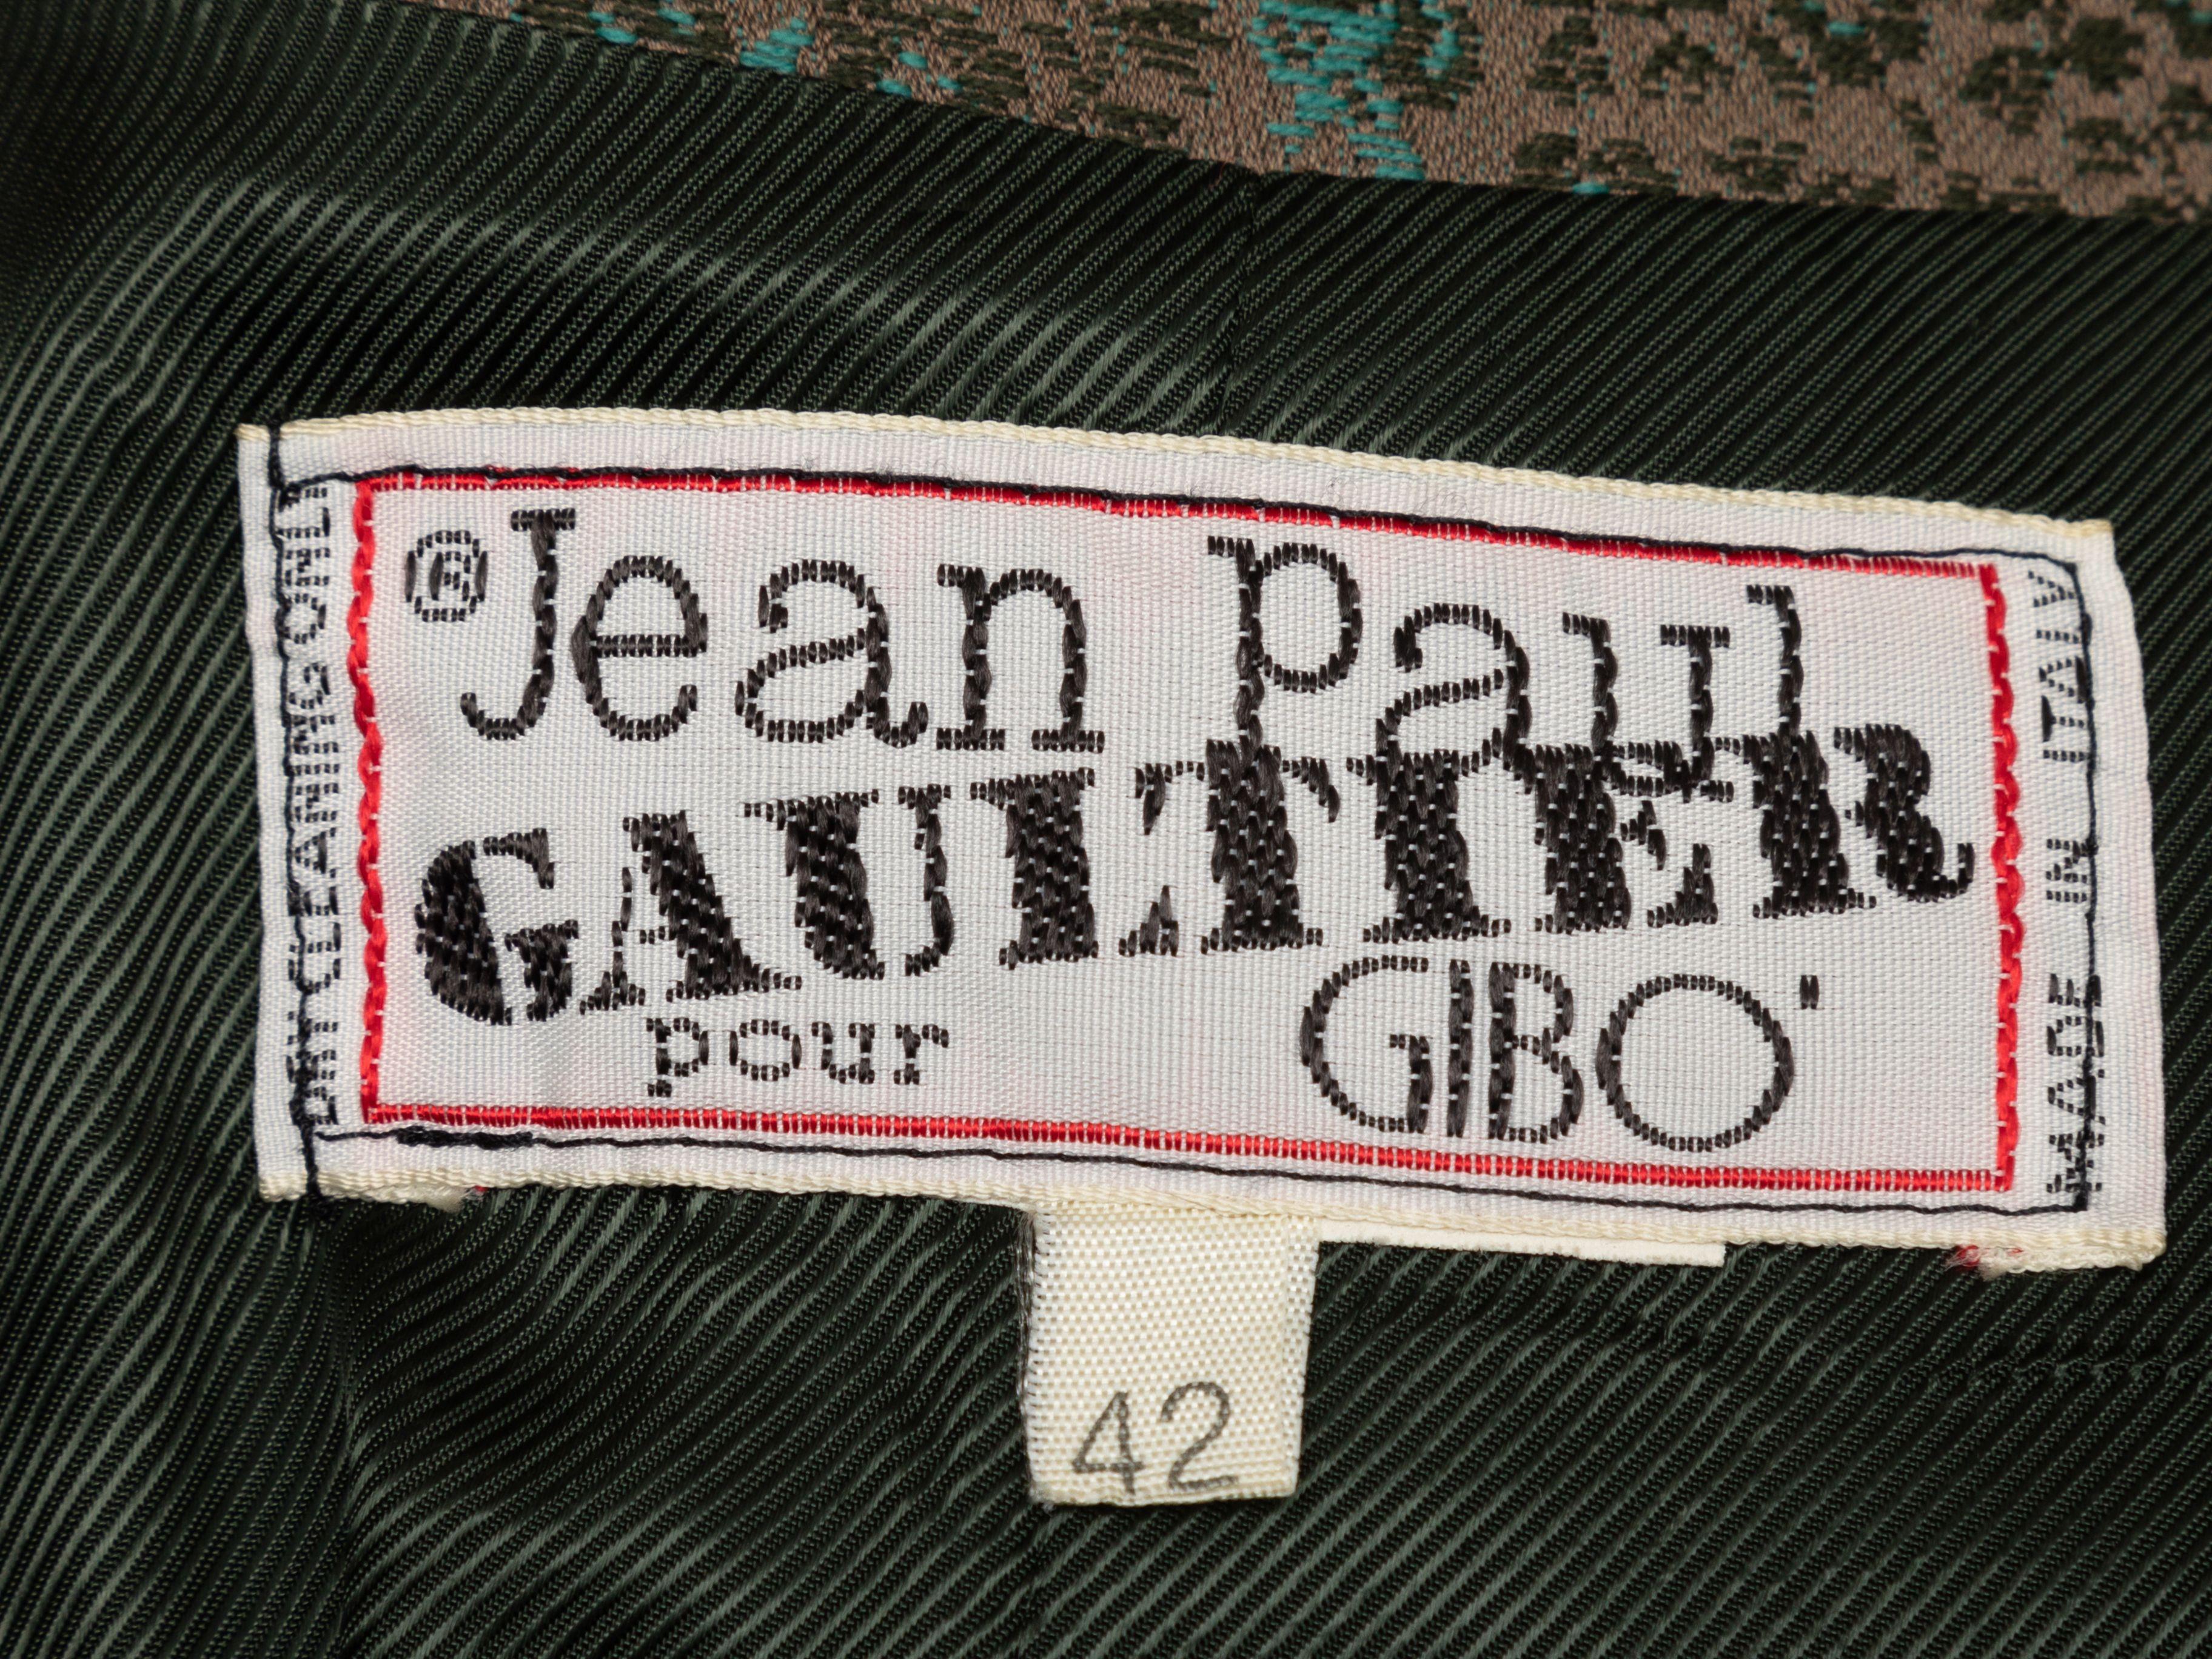 Product Details: olive and multicolor floral jacquard double-breasted blazer by Jean Paul Gaultier. Peaked lapel. Three welt pockets. Button closures at front. Designer size 42. 36